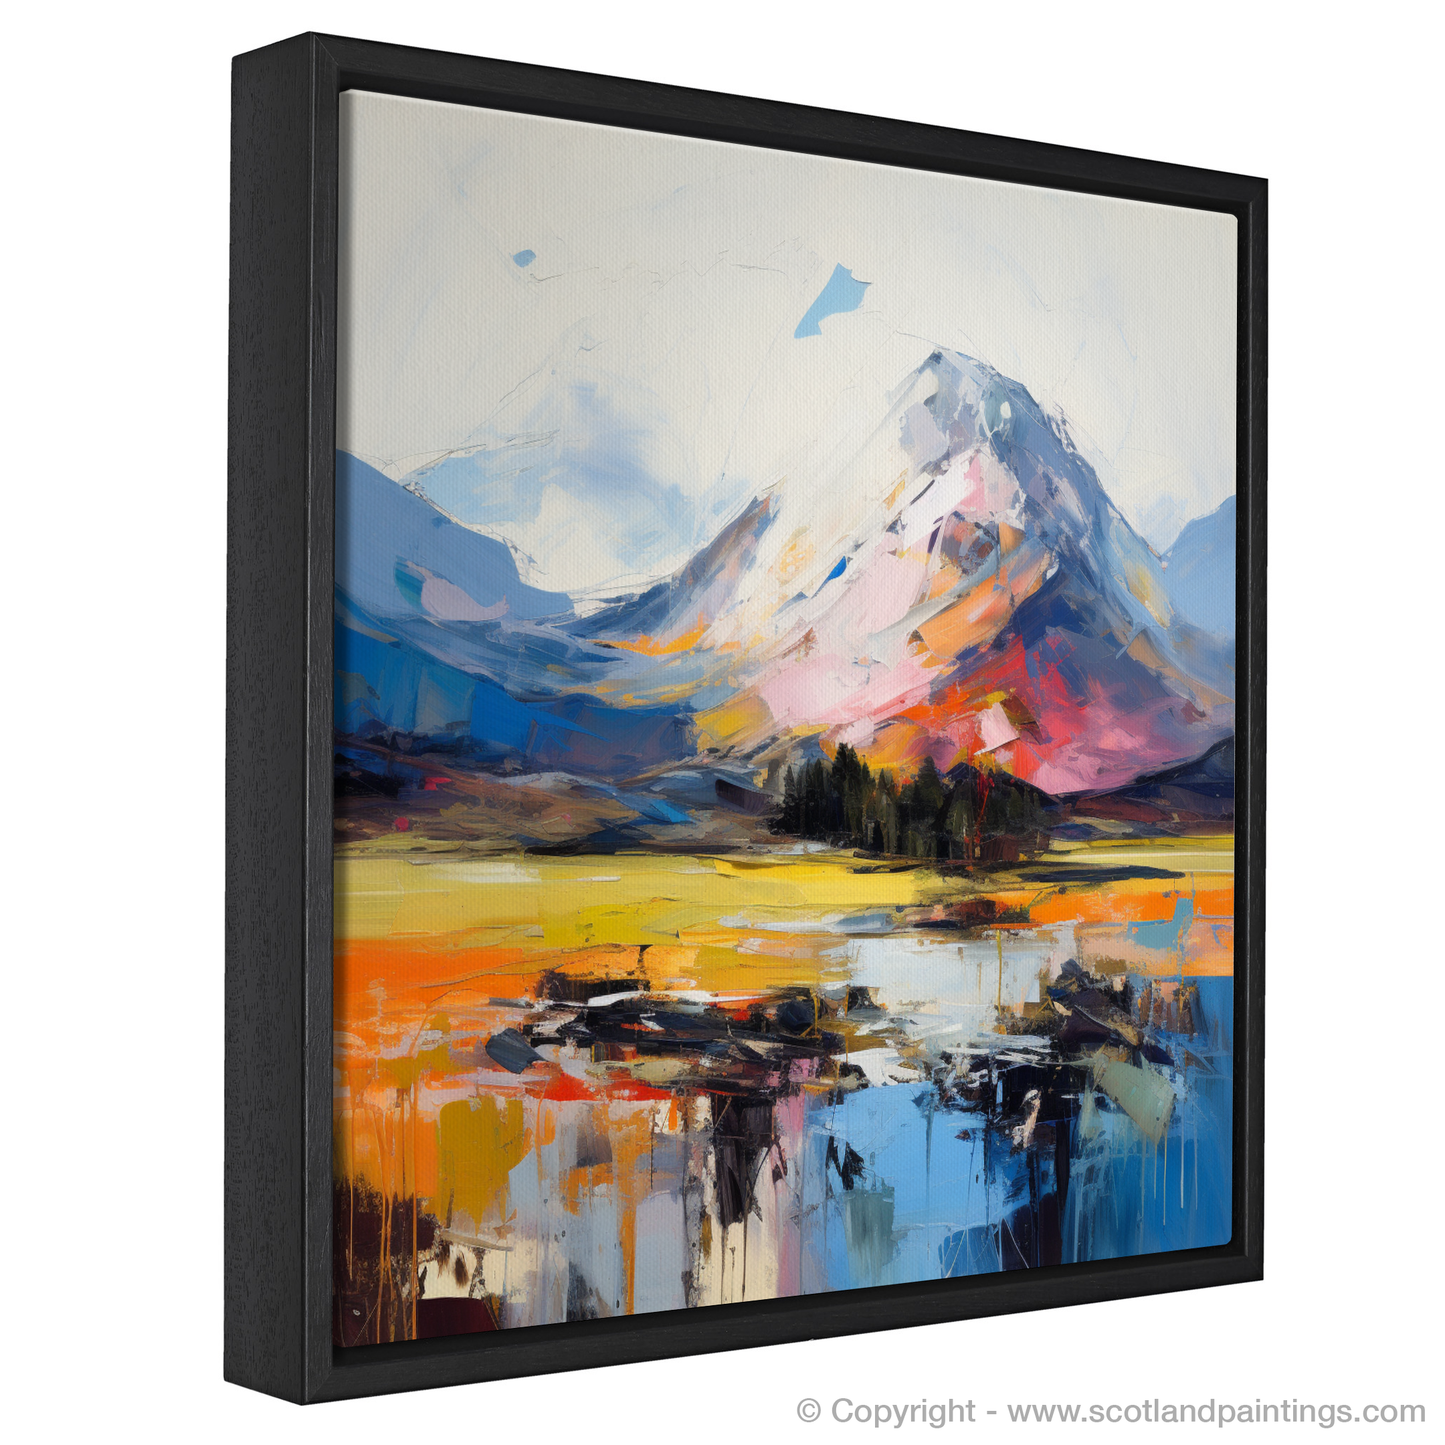 Painting and Art Print of Ben Nevis, Highlands entitled "Ben Nevis Unleashed: An Expressionist Ode to the Scottish Highlands".